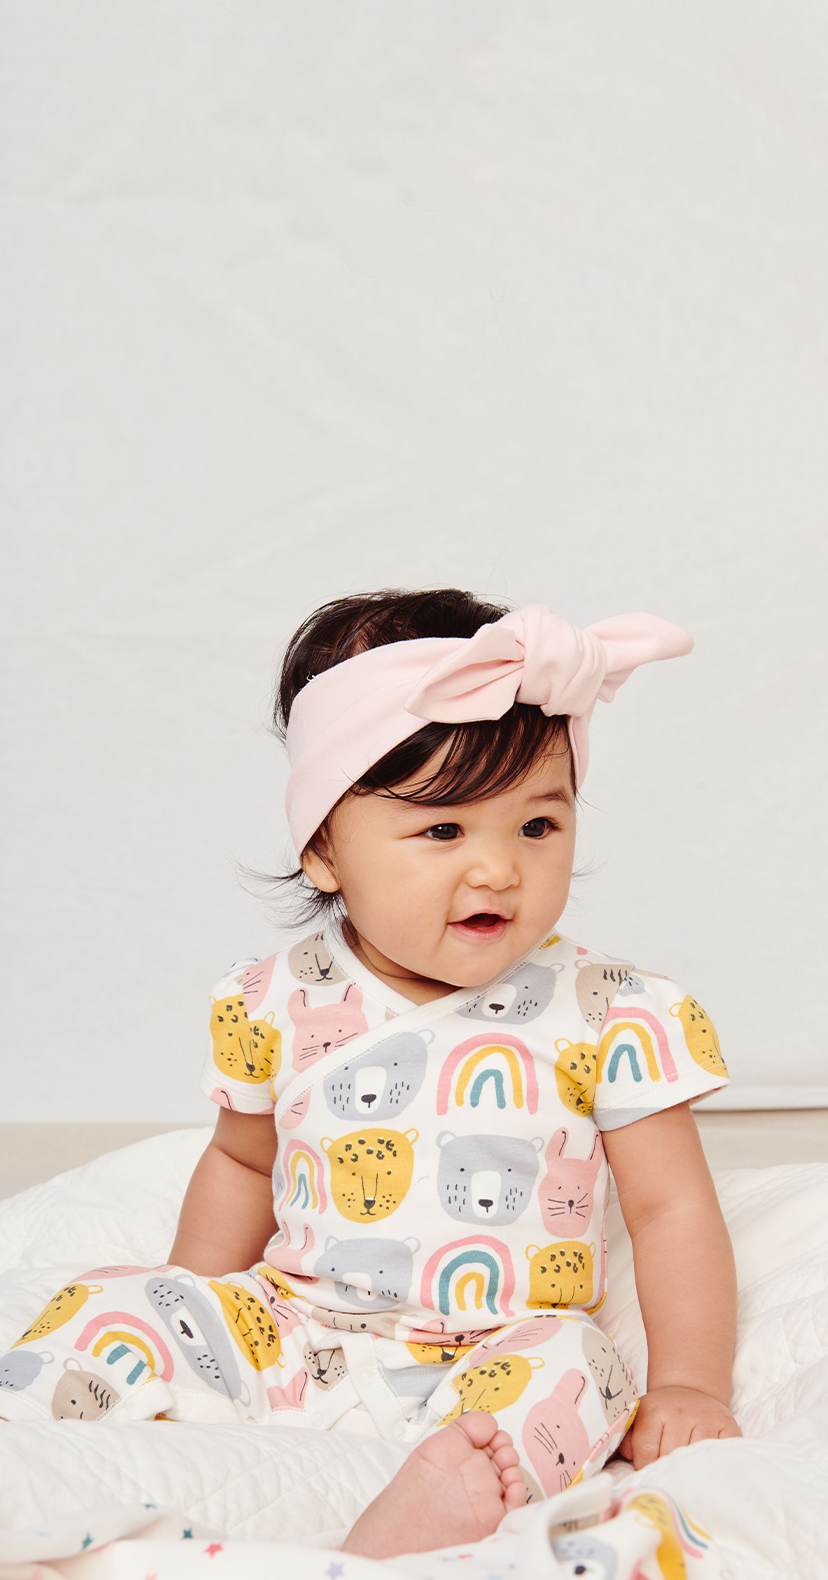 Affordable Organic Baby Clothes: 9 Brands For The Best Sustainable Snuggles